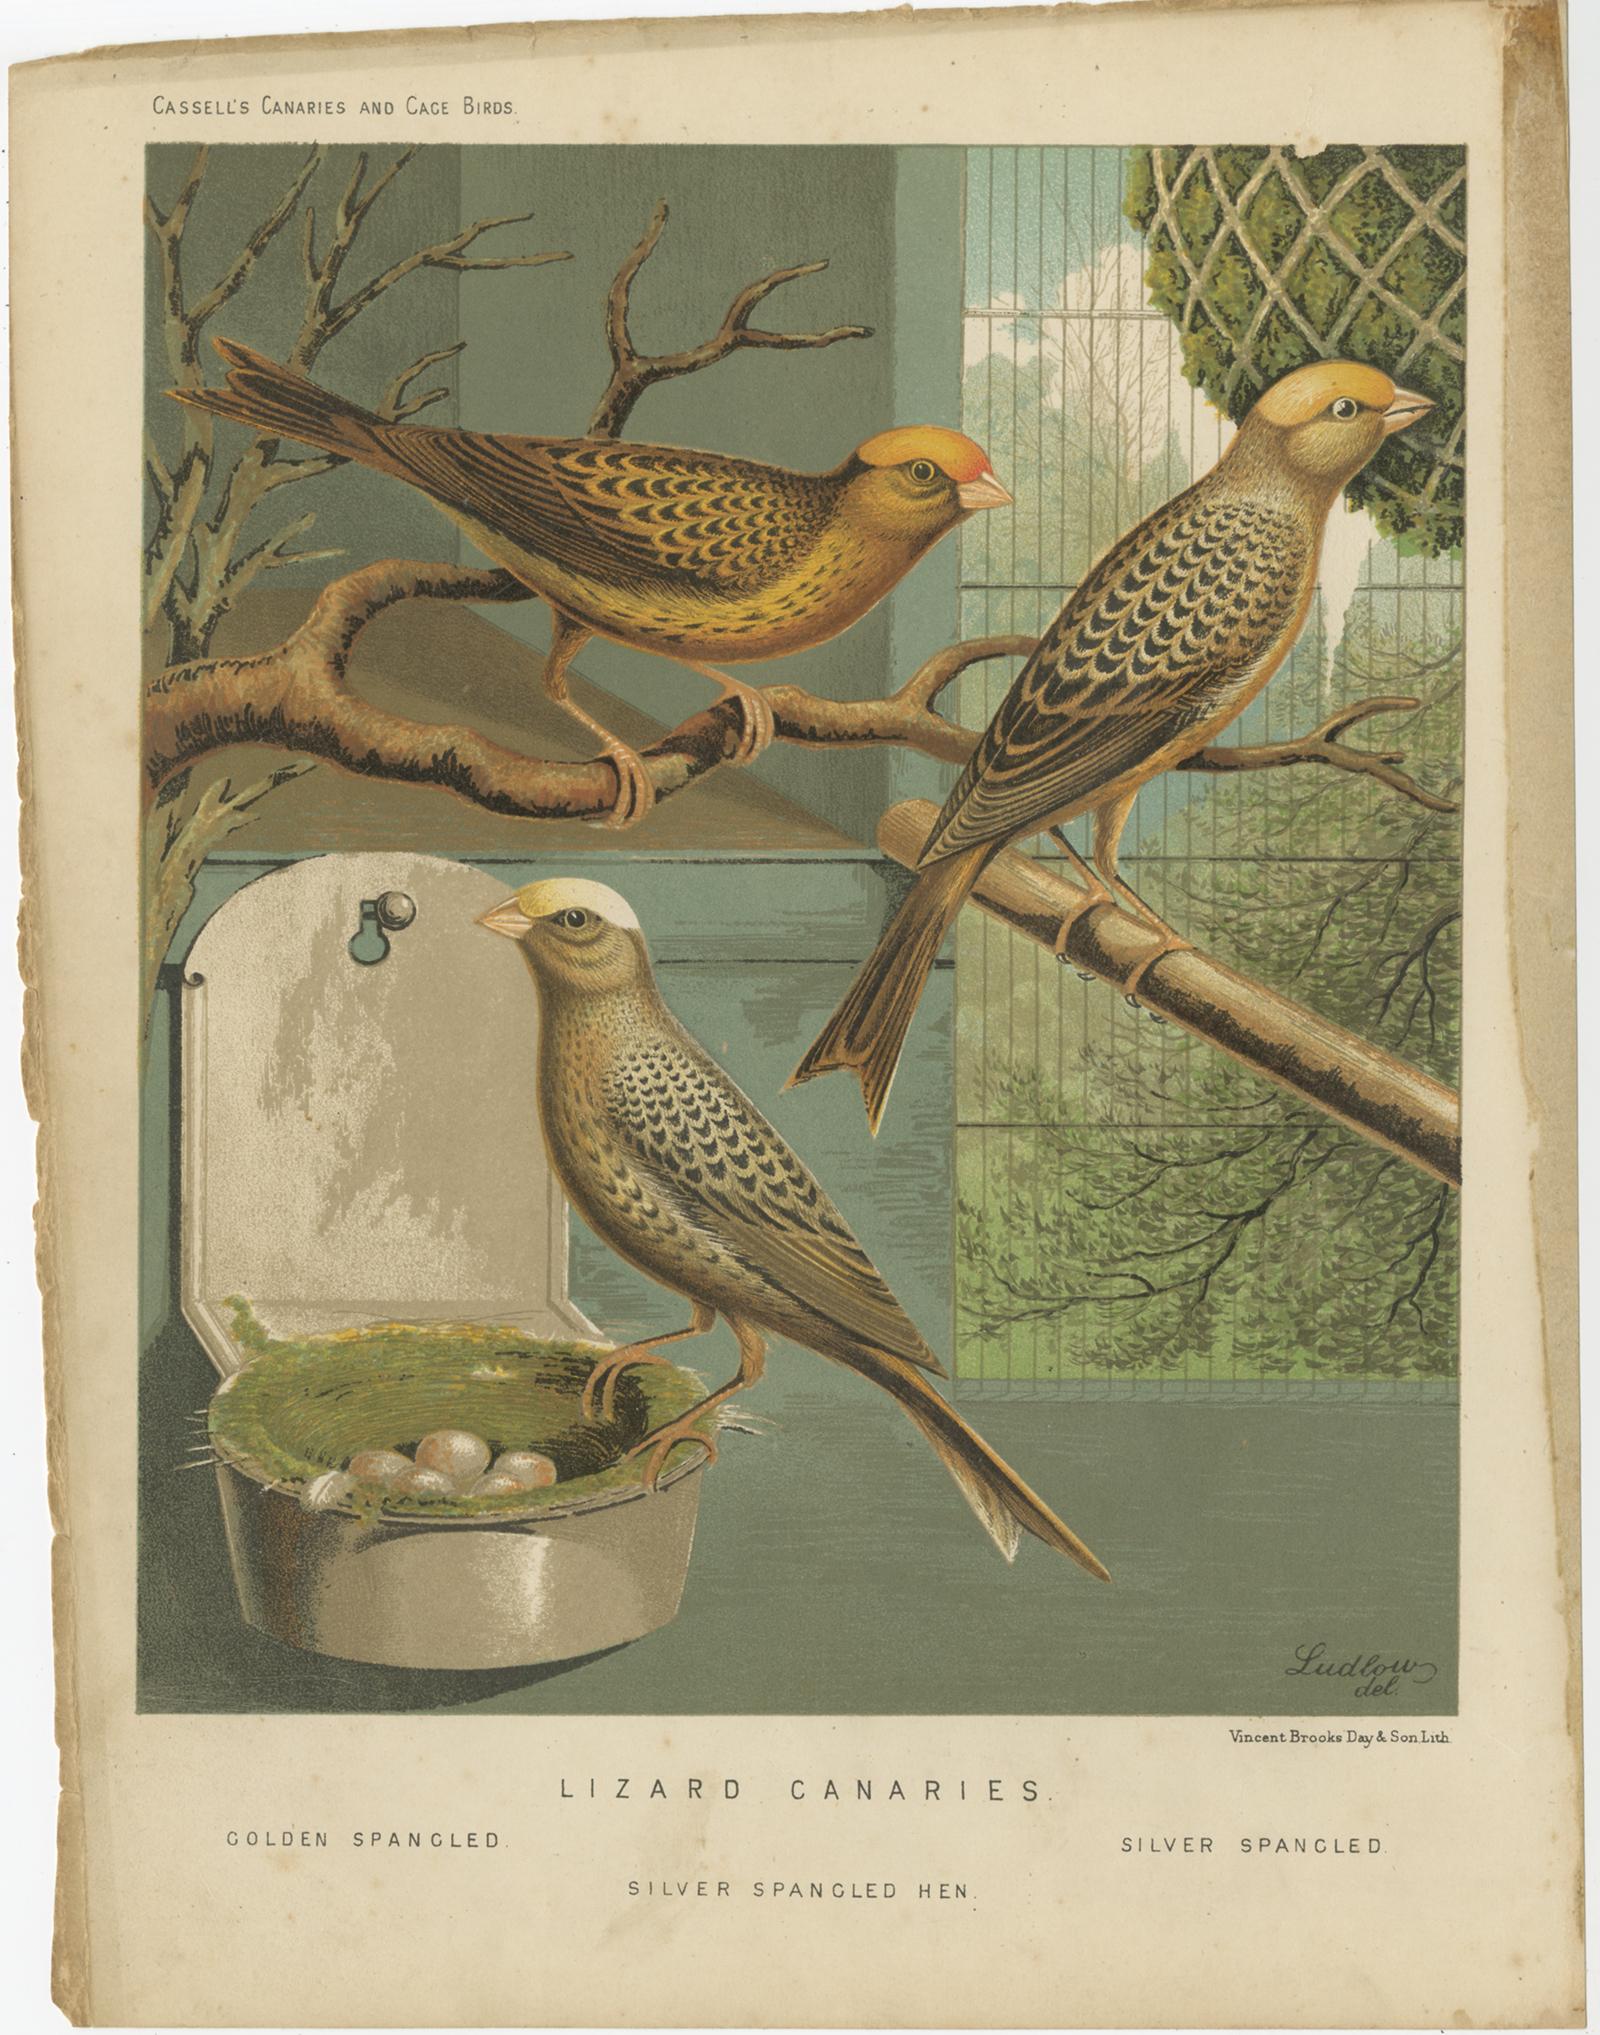 Antique bird print titled 'Lizard Canaries 1. Golden Spangled, 2. Silver Spangled Hen 3. Silver Spandgled' Old bird print depicting the Golden-spangled, 2. Silver Spangled Hen 3. Silver Spandgled. This print originates from: 'Illustrated book of